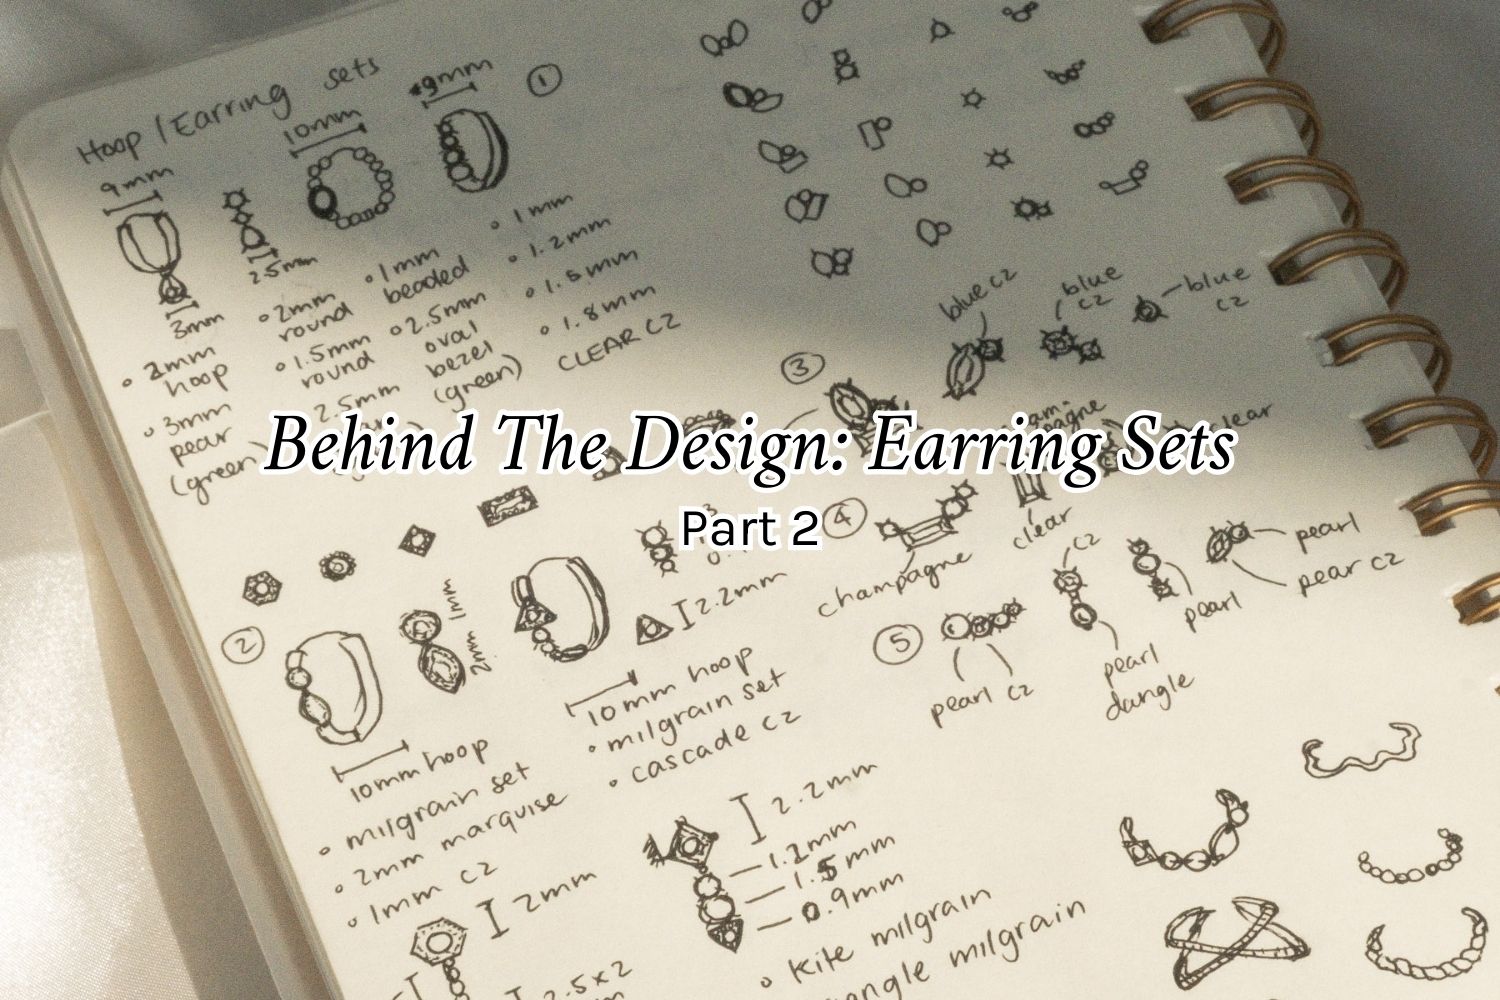 Behind The Design: Earring Sets Collection Part 2